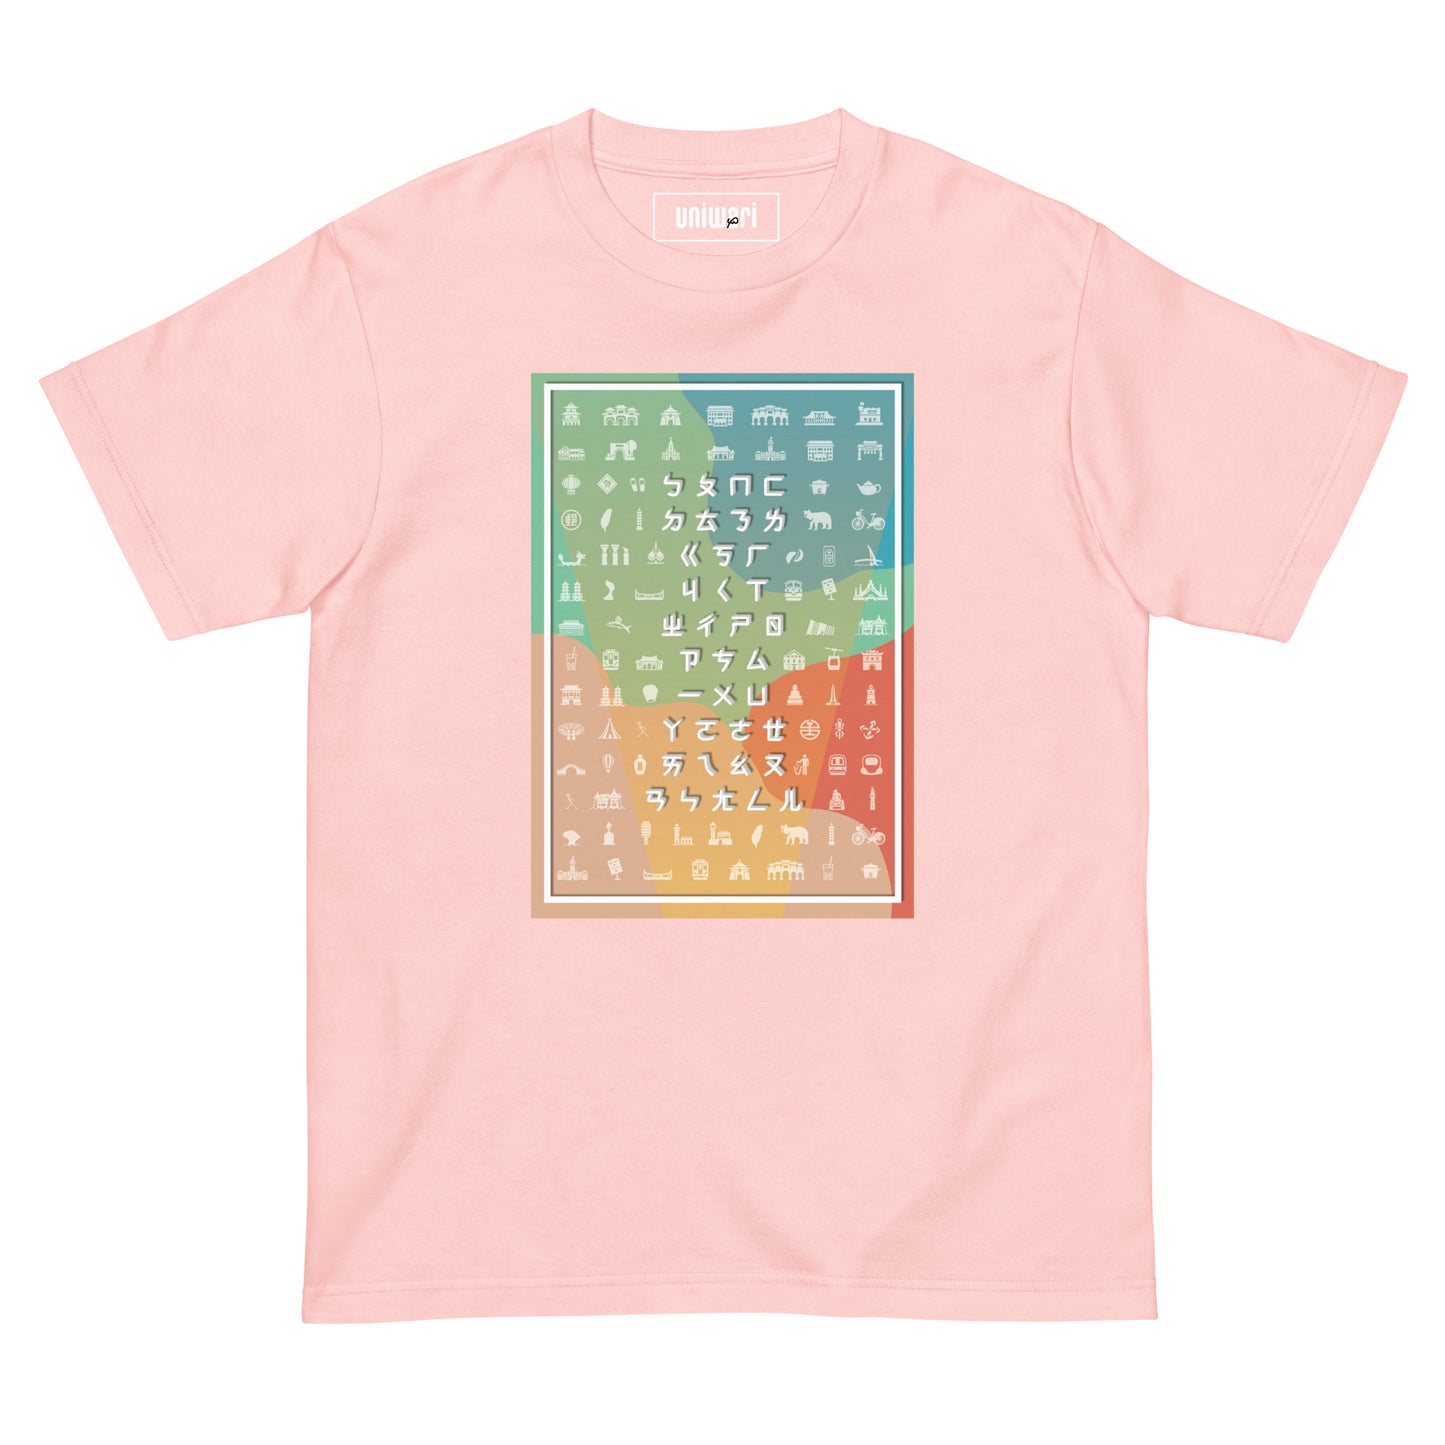 Pink High Quality Tee - Front Design with Taiwanese Alphabet 